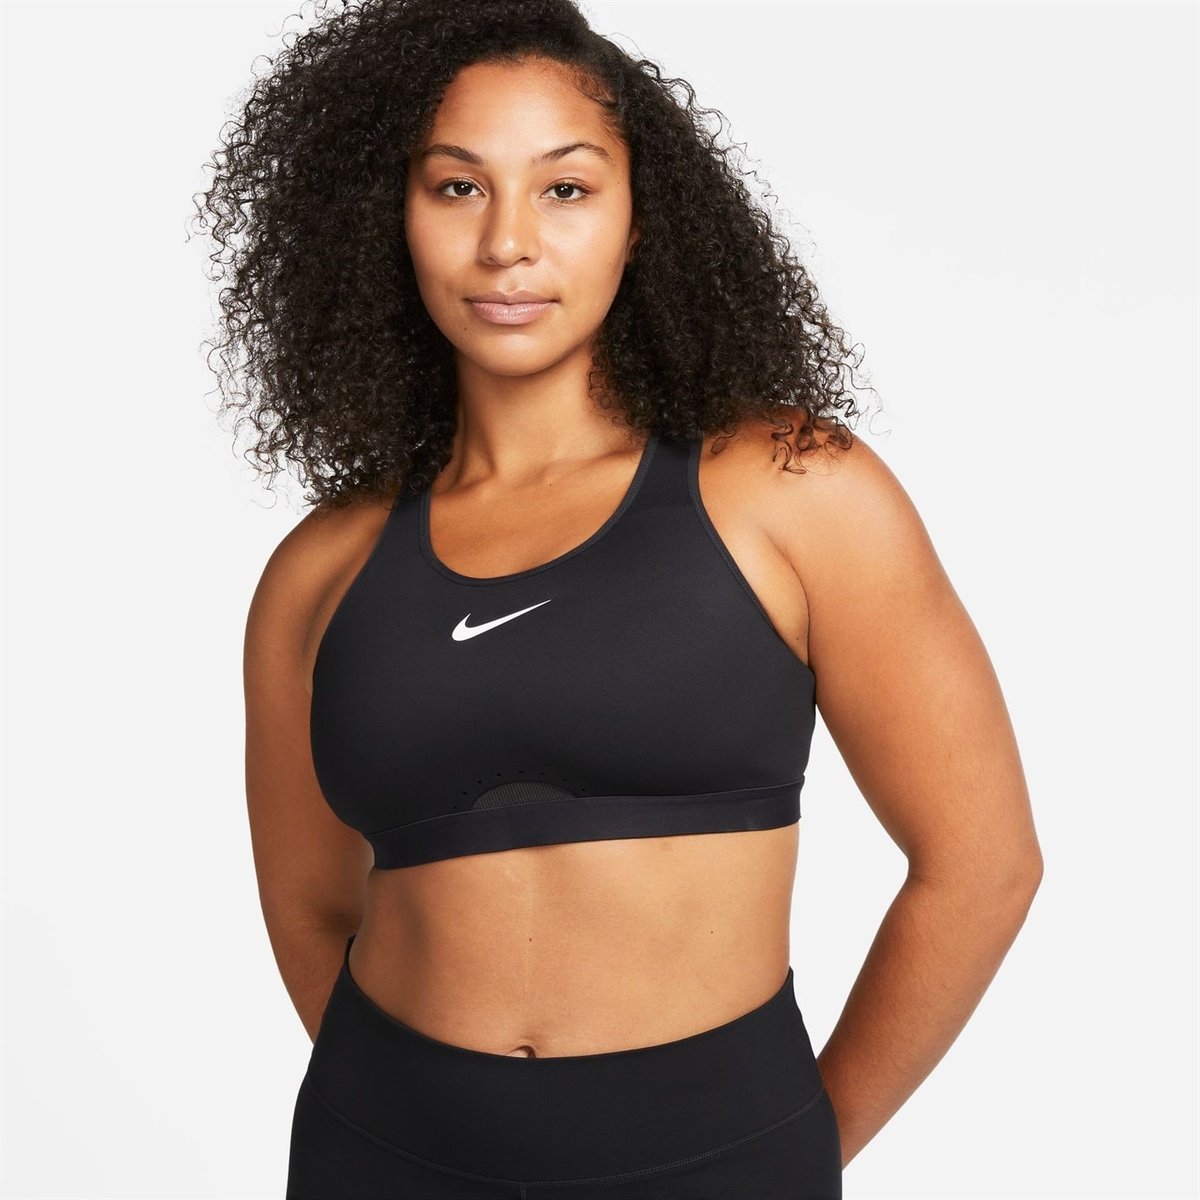 Nike Running Clothing Collection - all